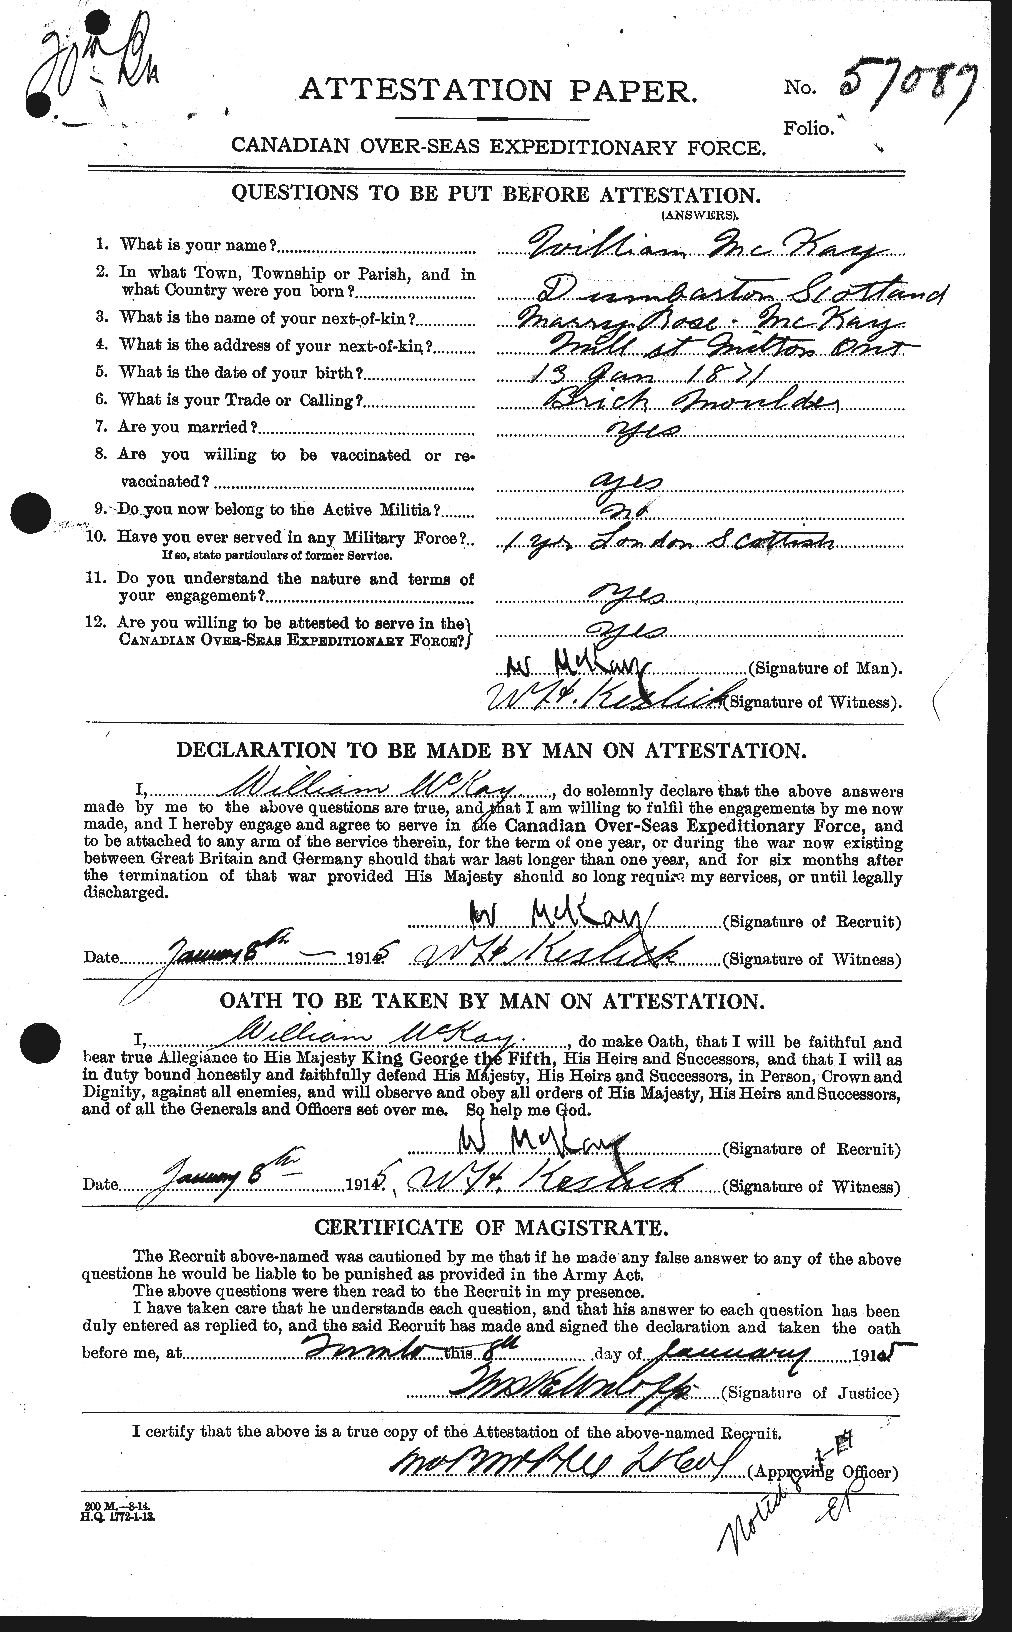 Personnel Records of the First World War - CEF 530237a